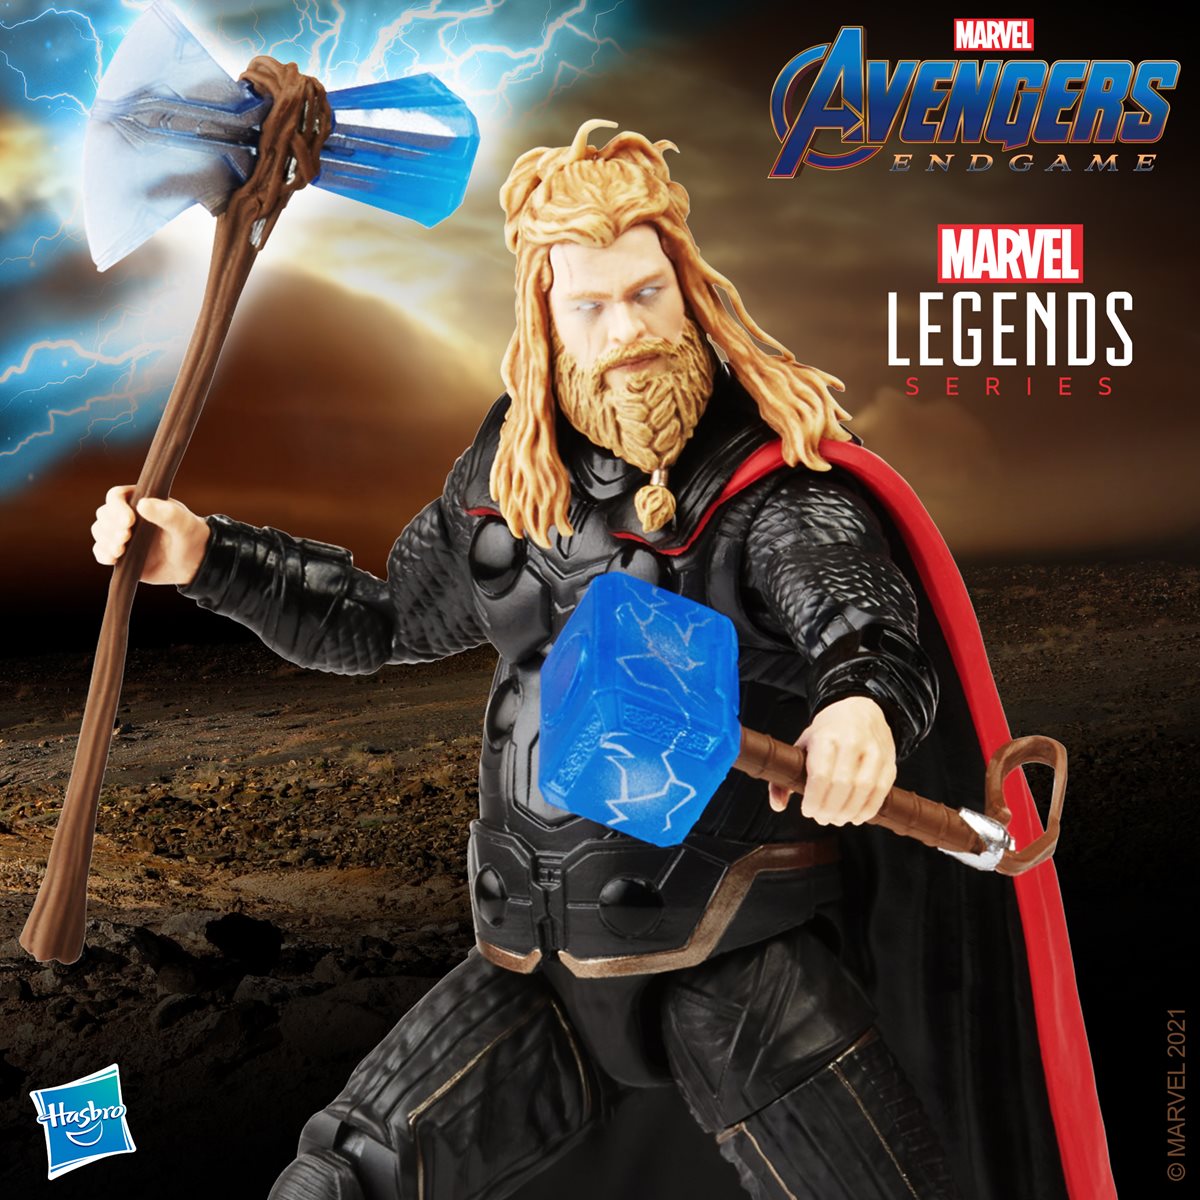  Marvel Thor Legends Series 6-inch Thor : Toys & Games